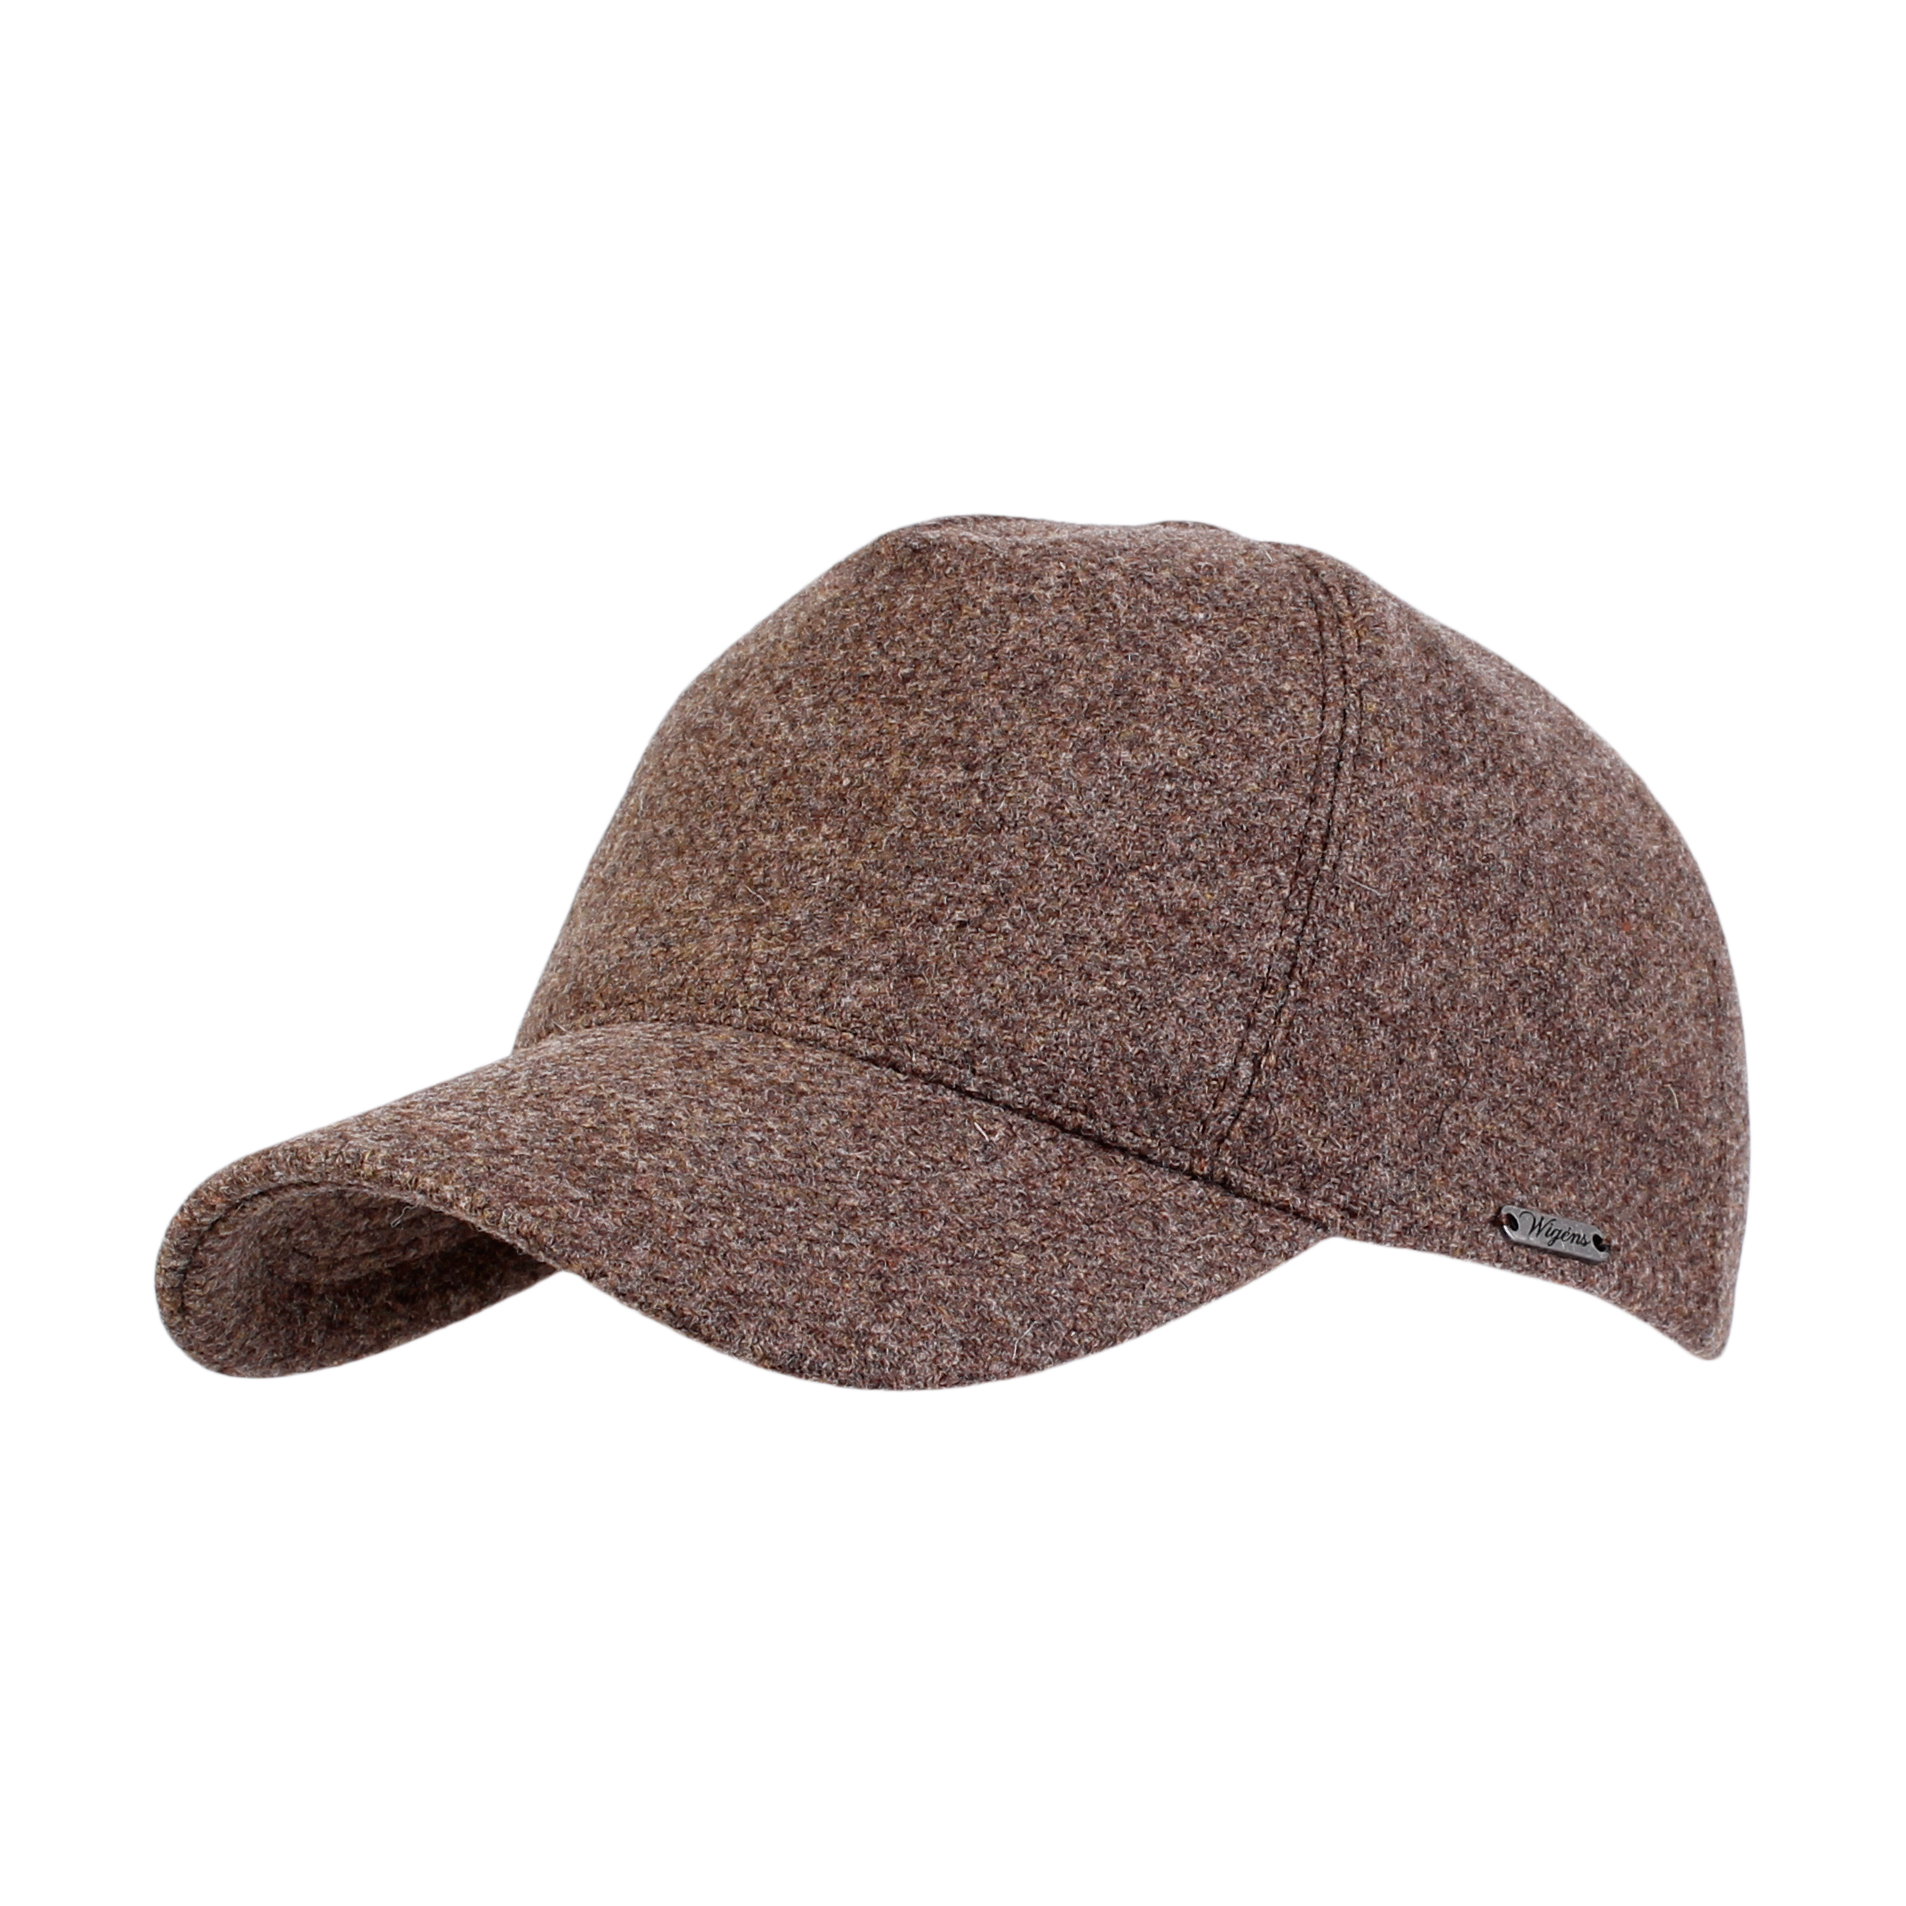 Mélange Shetland Wool Baseball Contemporary Cap (Choice of Colors) by Wigens